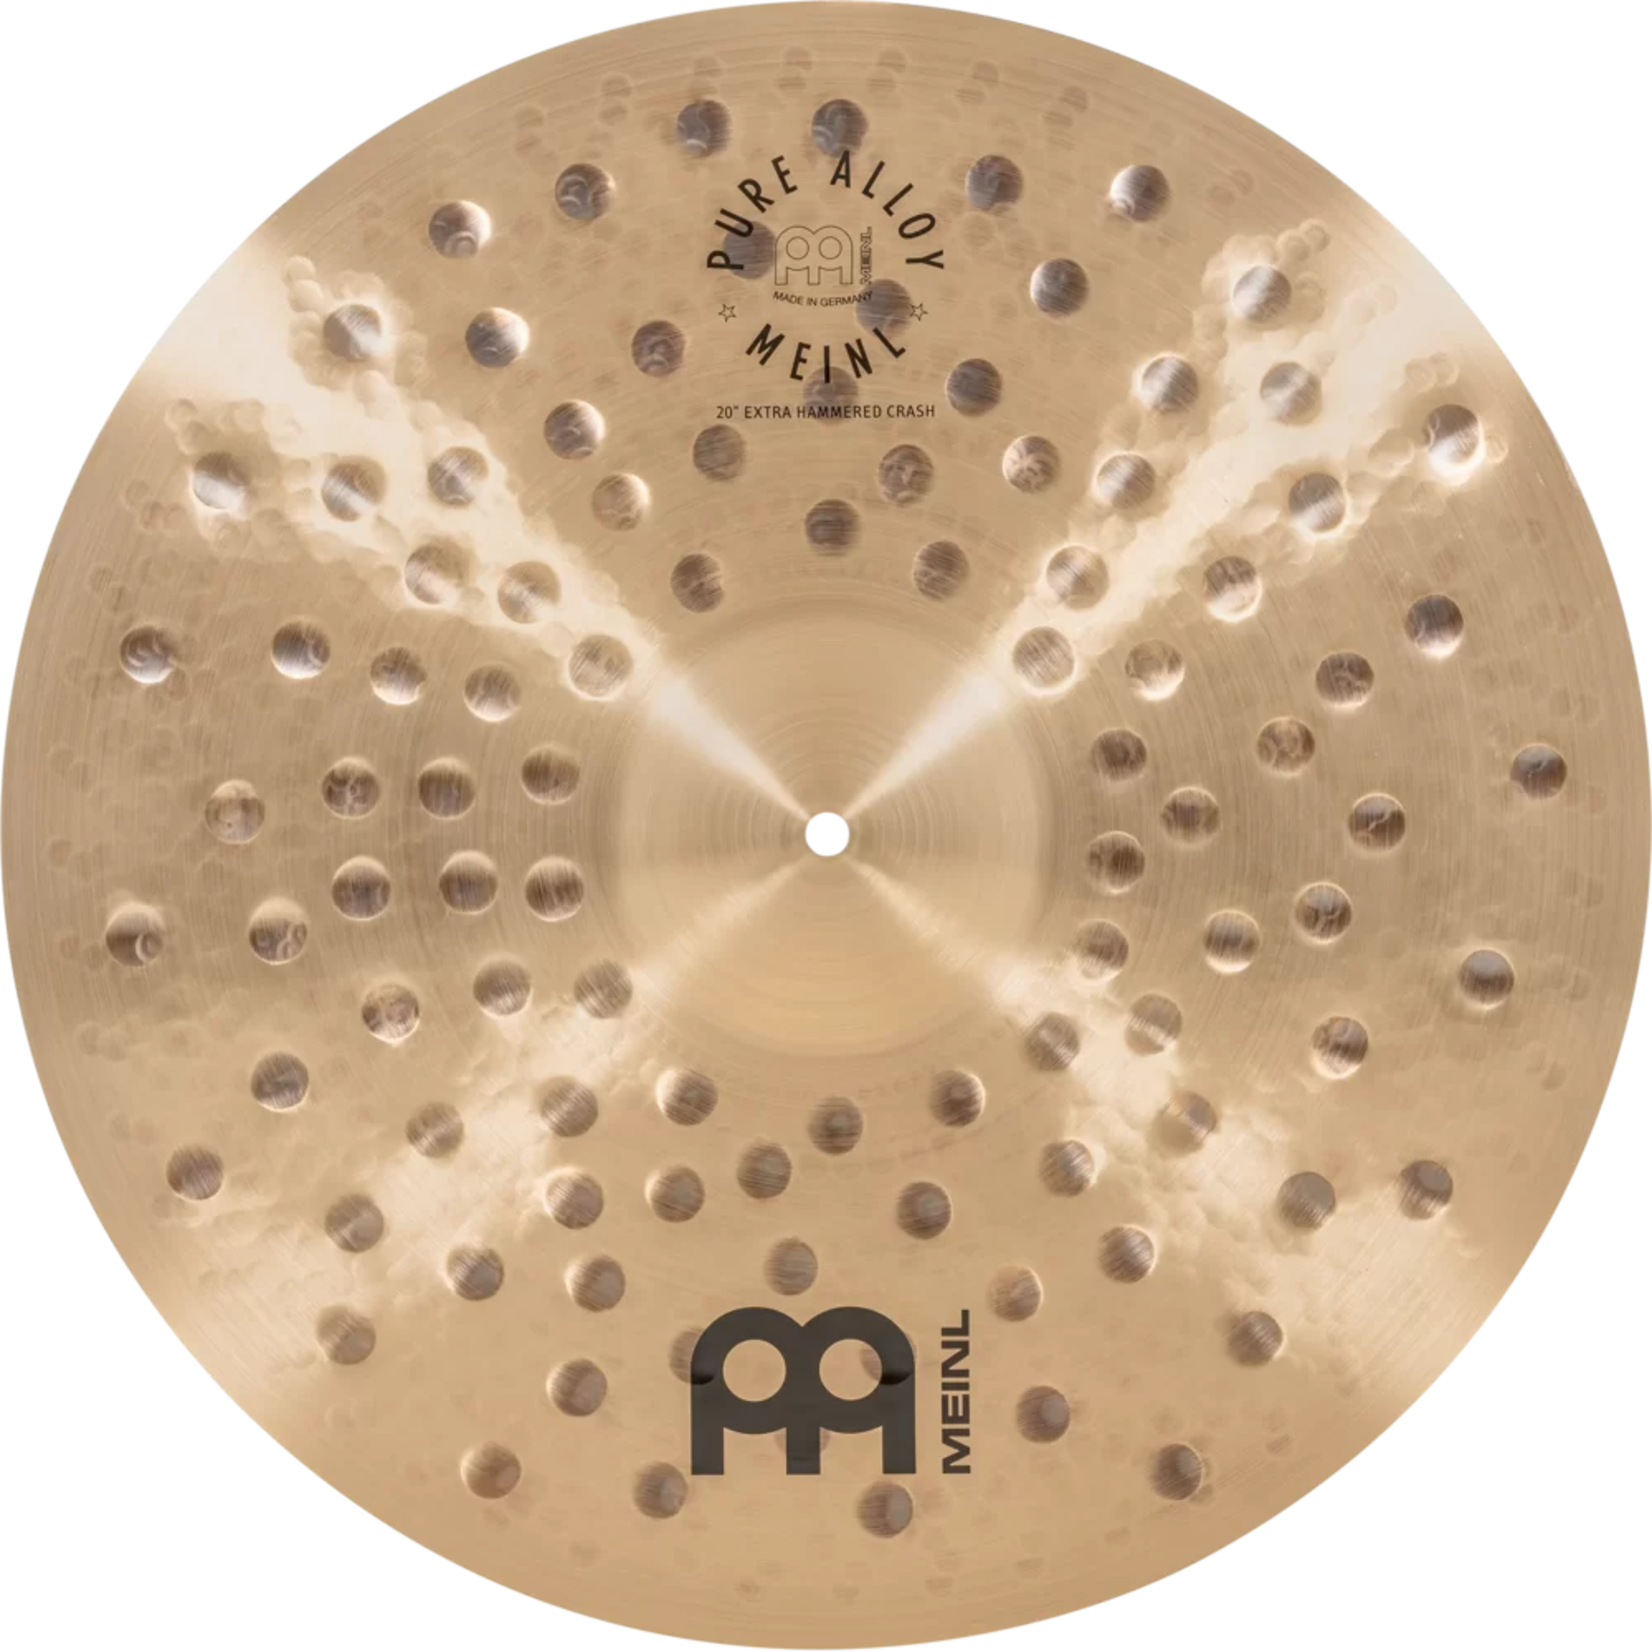 Meinl Meinl Pure Alloy 20" Extra Hammered Crash PA20EHC